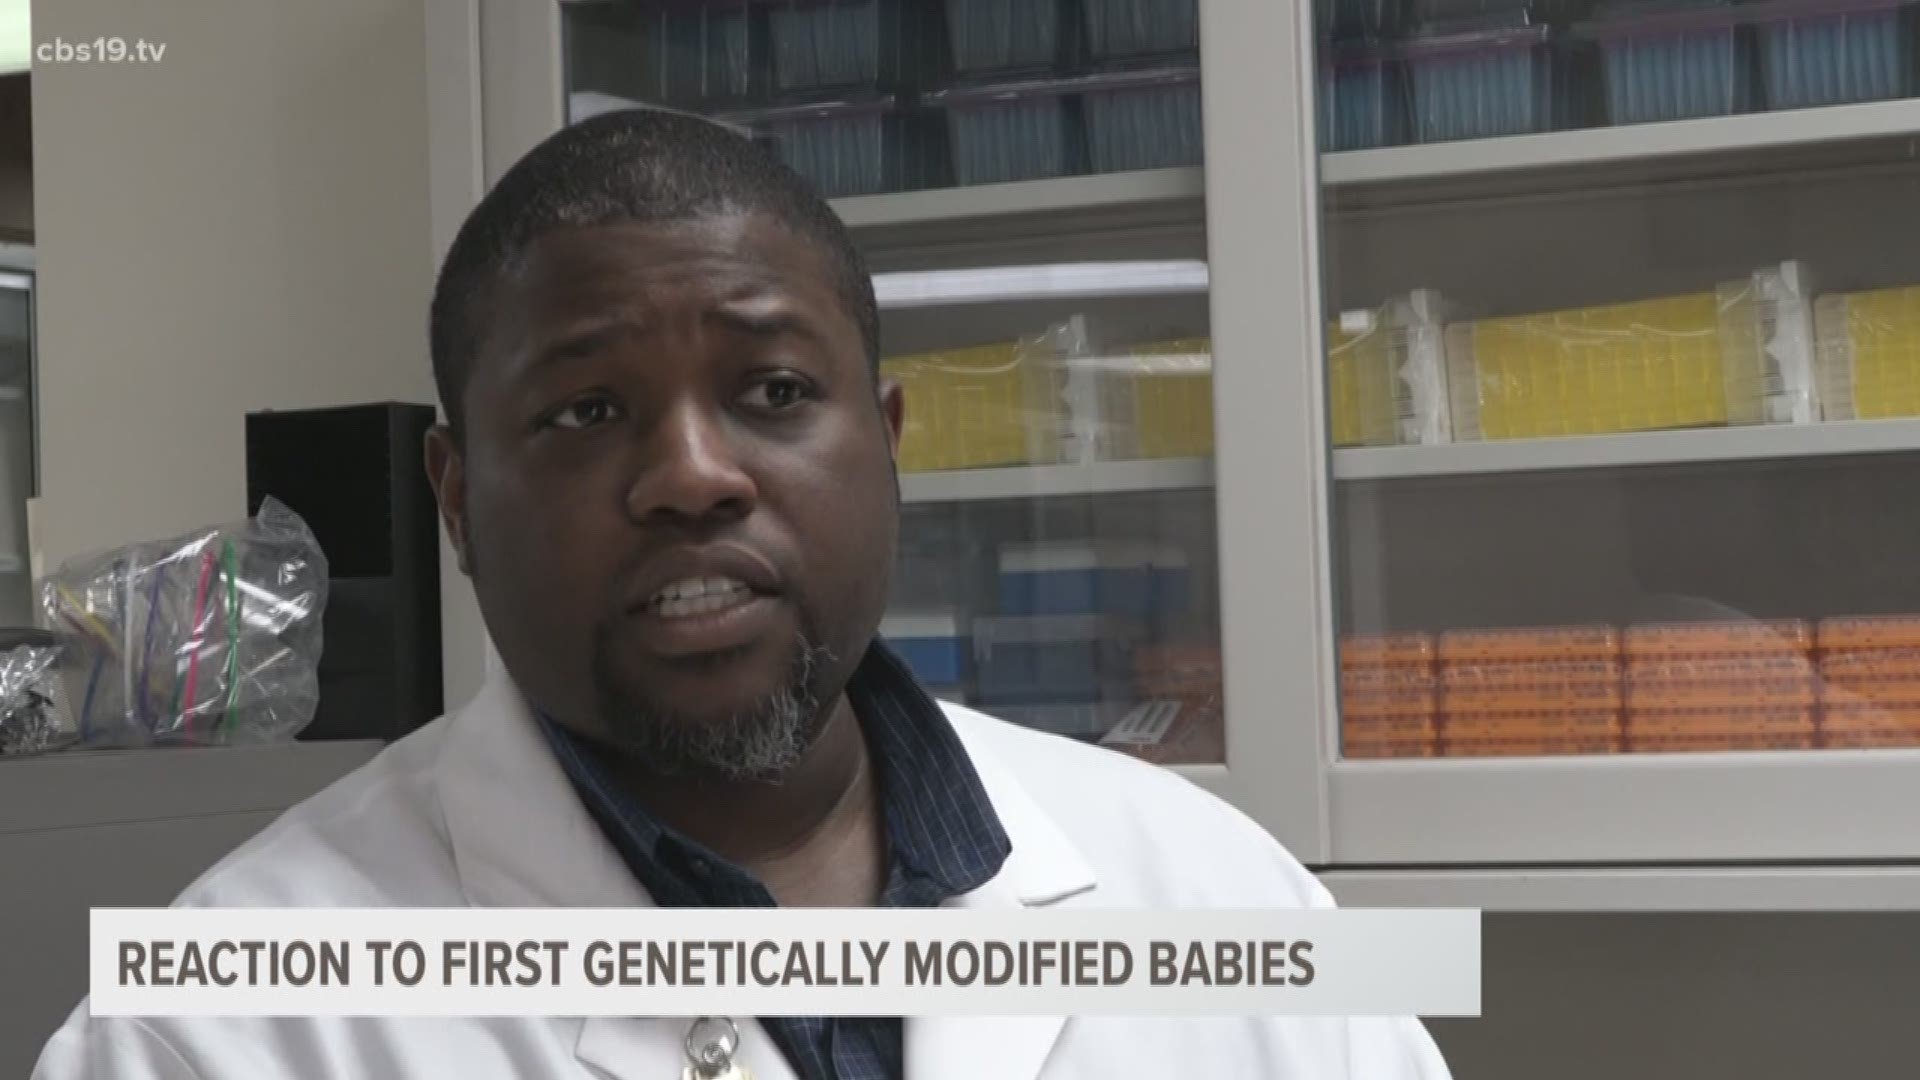 A Chinese researcher claims to have delivered the first genetically modified babies. He's currently under investigation, but his remarks have brought outrage from experts on the subject and along with it quite a bit of questions.